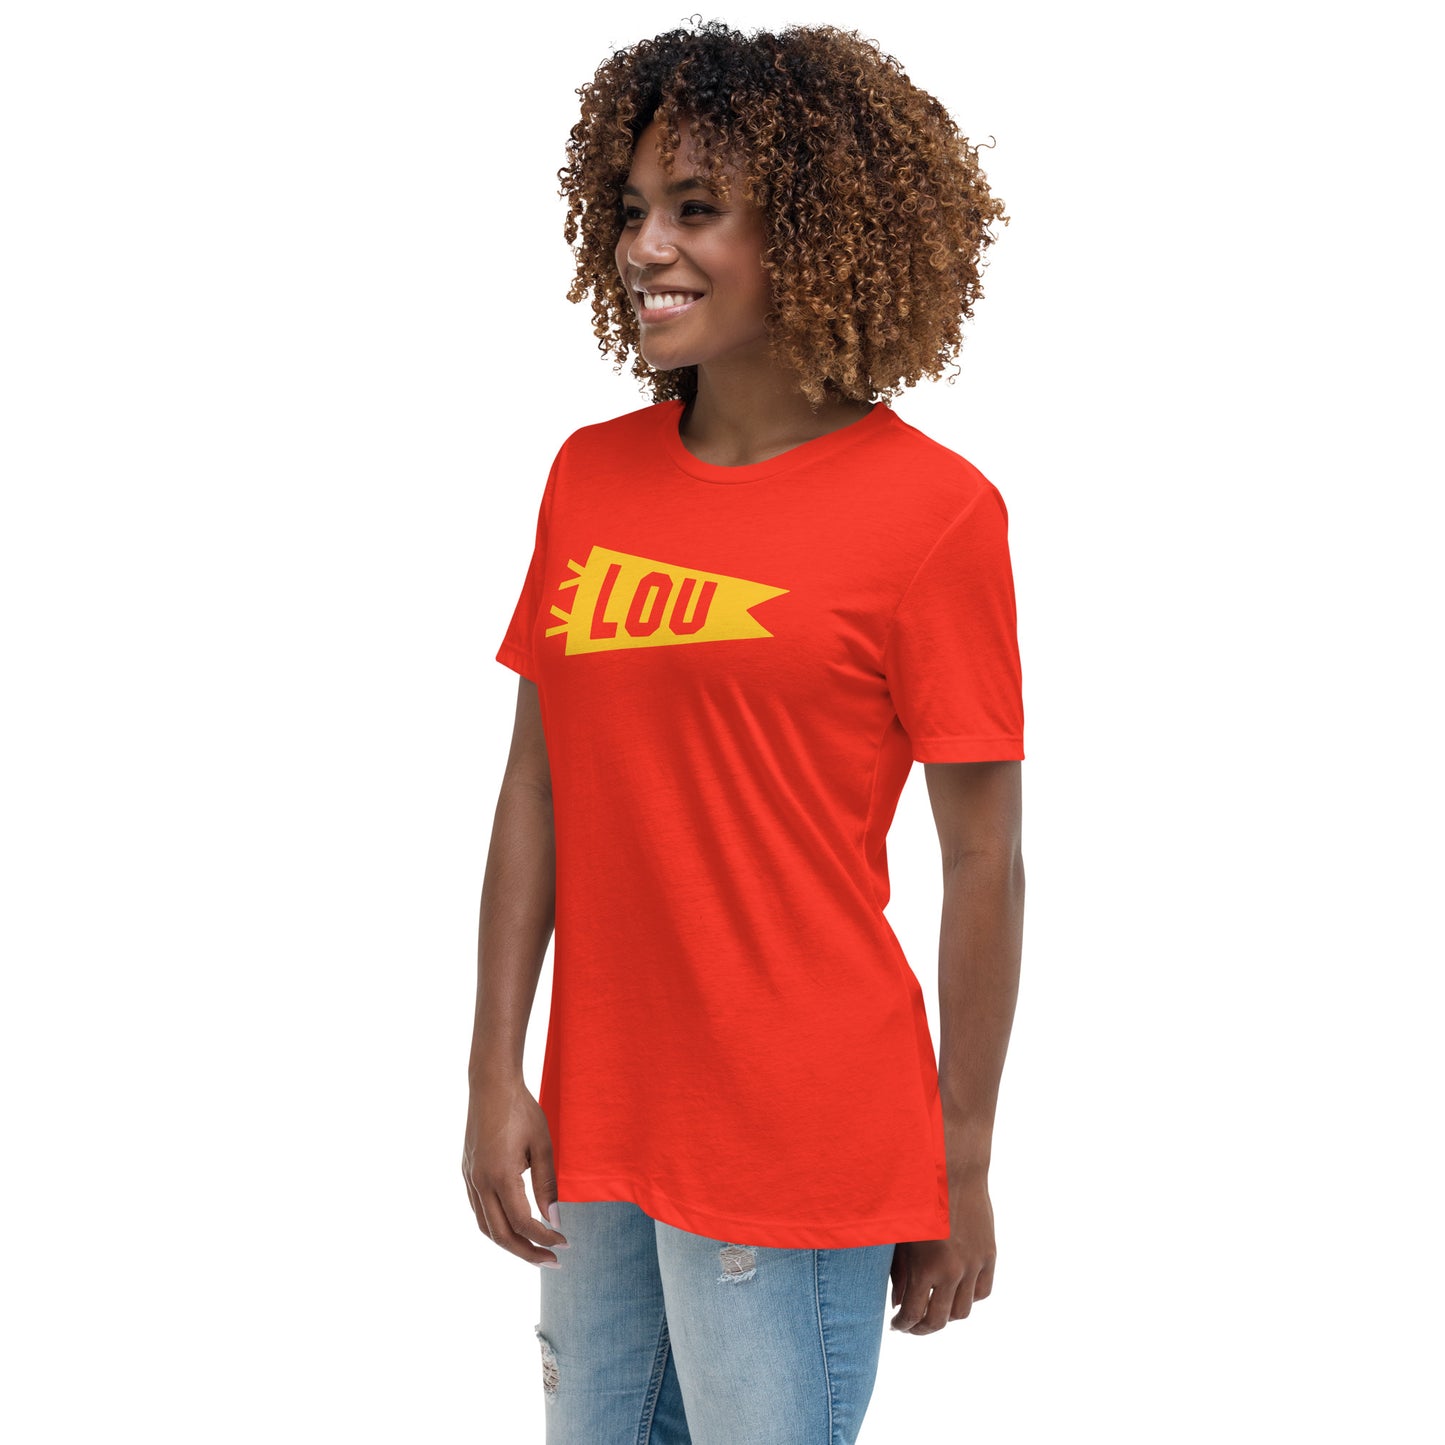 Airport Code Women's Tee - Yellow Graphic • LOU Louisville • YHM Designs - Image 04